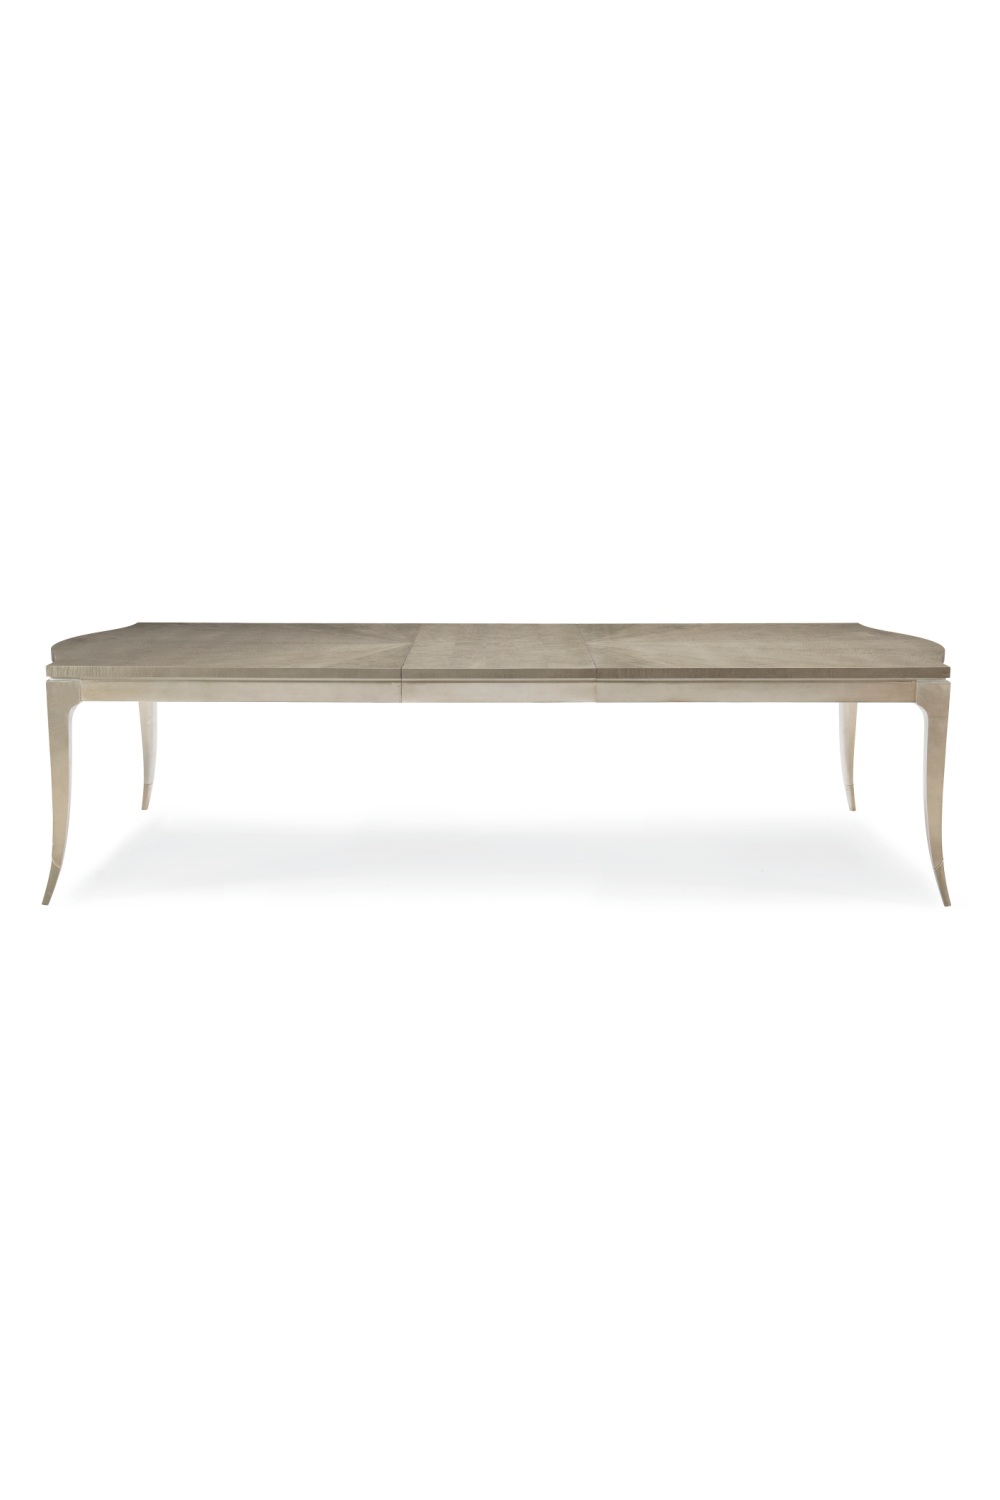 Curly Maple Dining Table | Caracole On A Silver Platter | Oroa.com